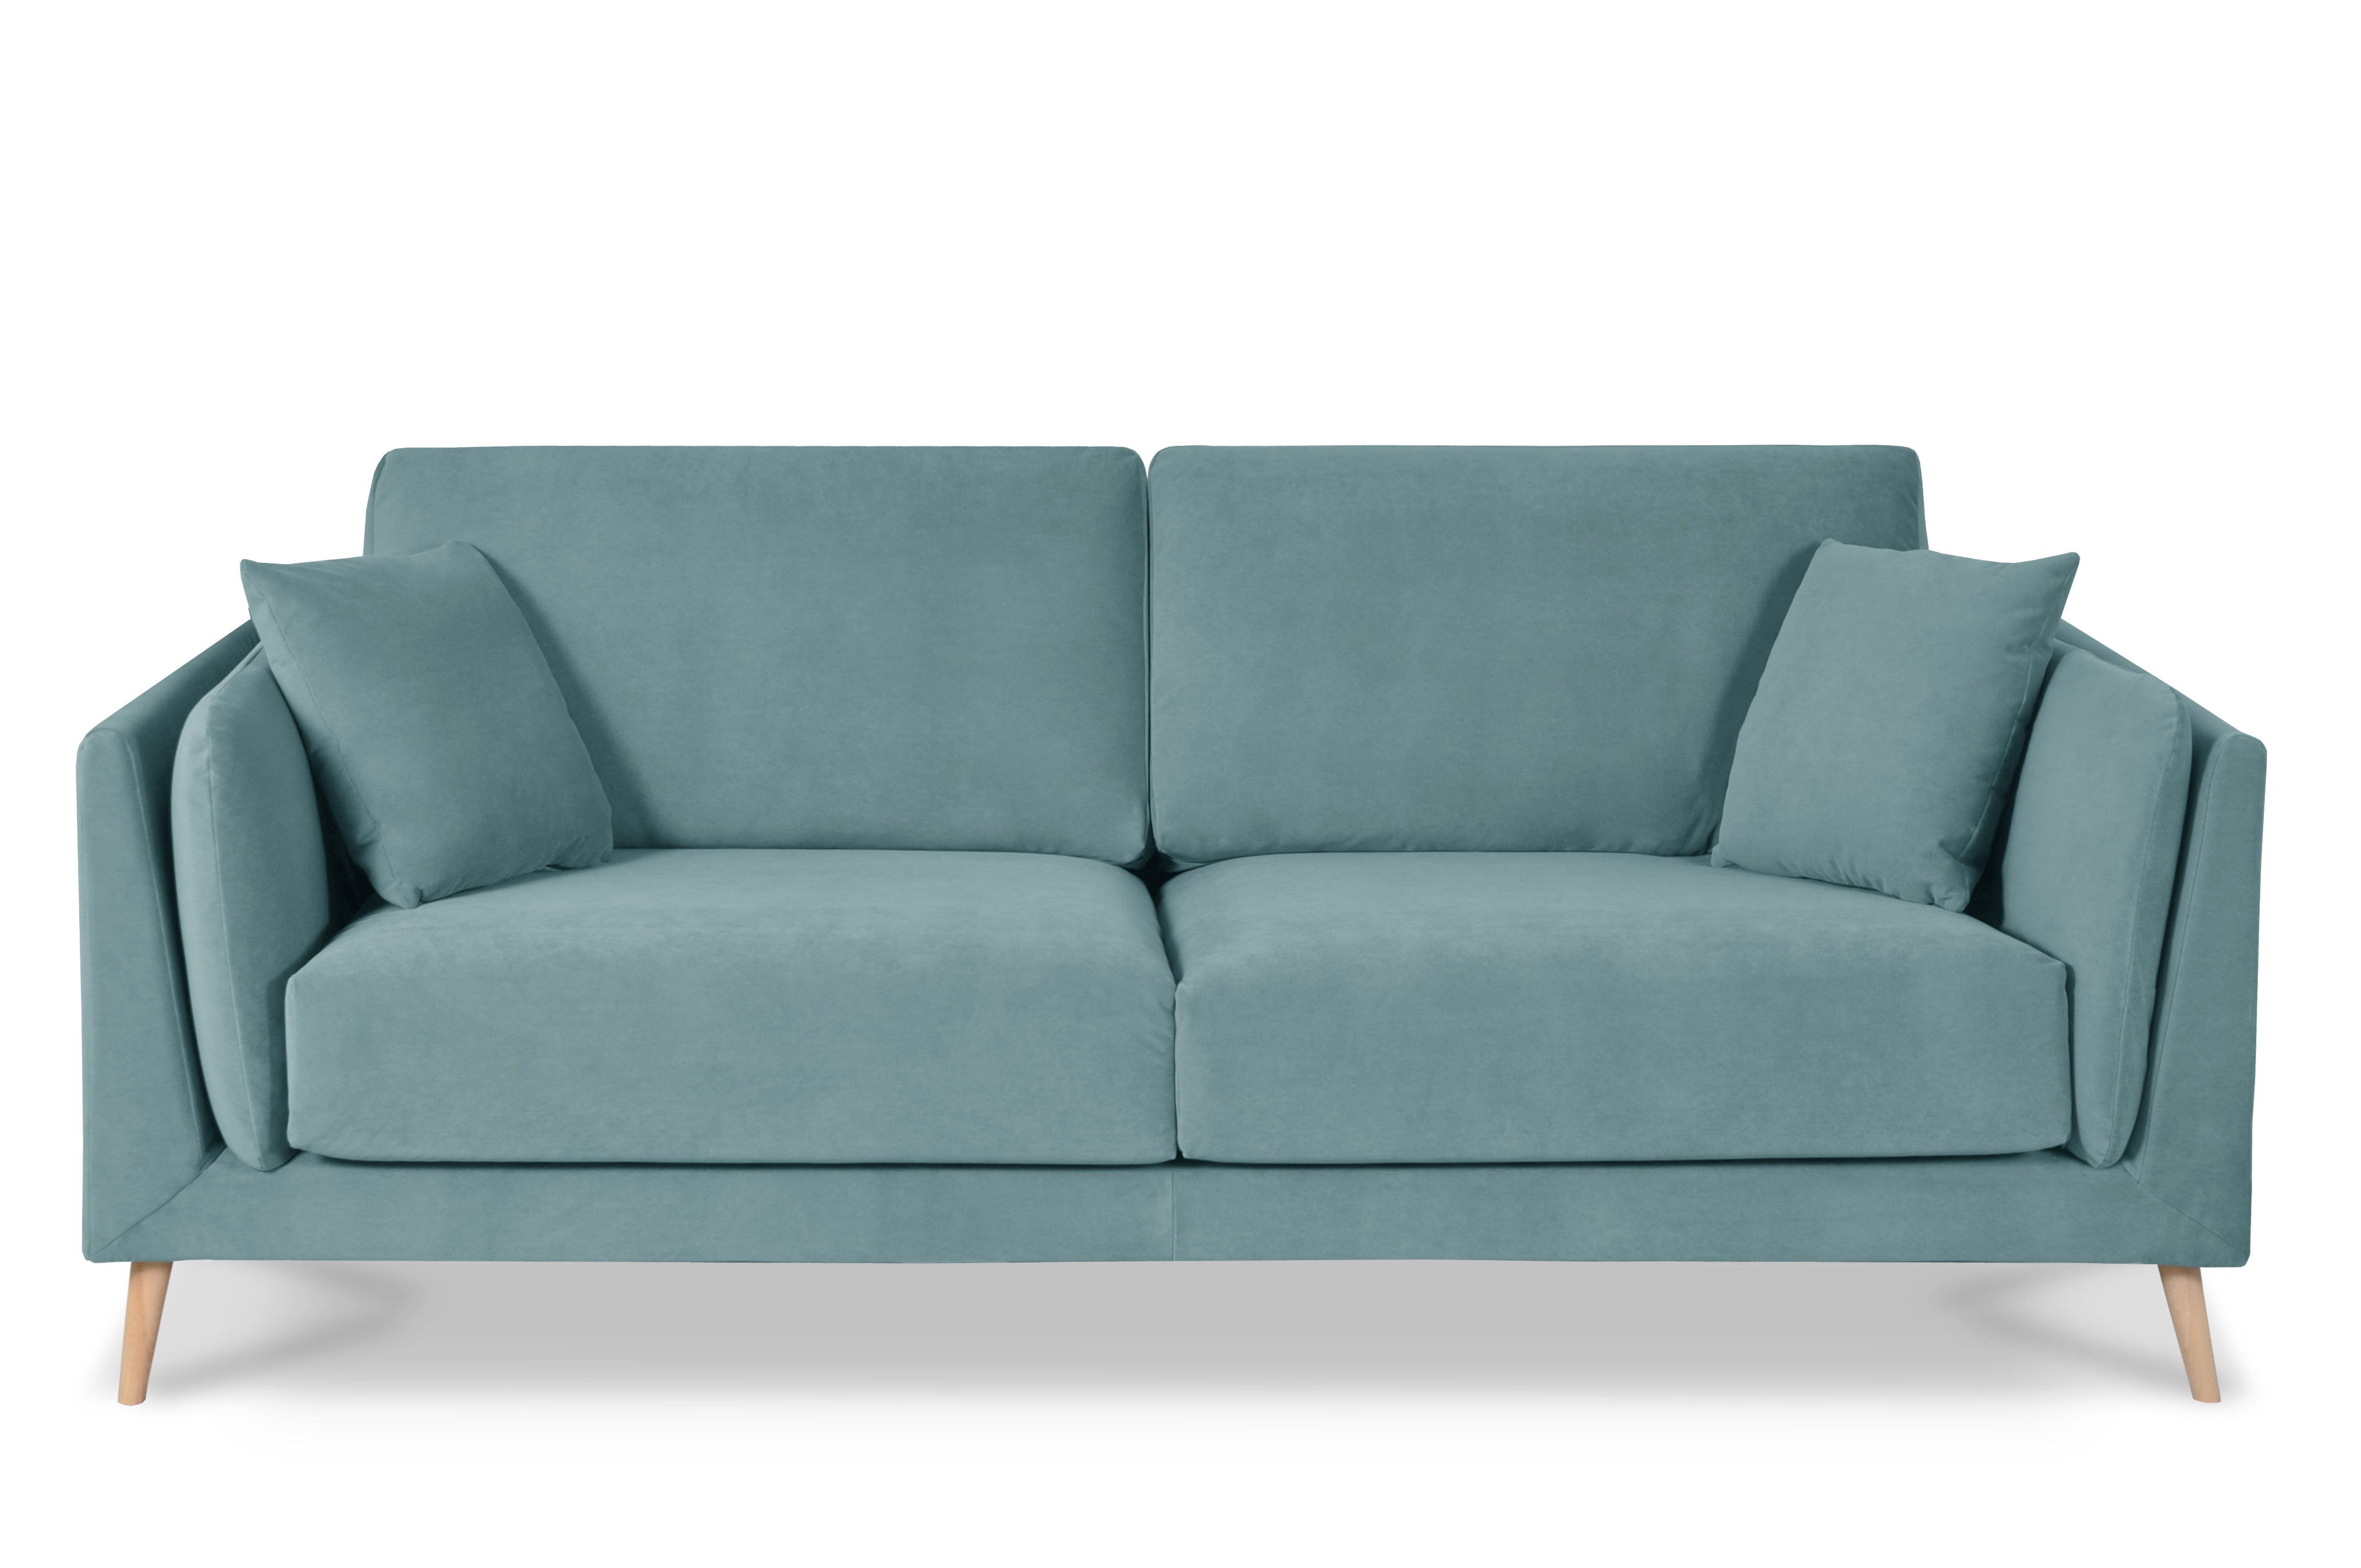 3 seater sofa upholstered in blue fabric, wooden legs, for living room, dining room, bedroom office - MAXIME 3 SEATER